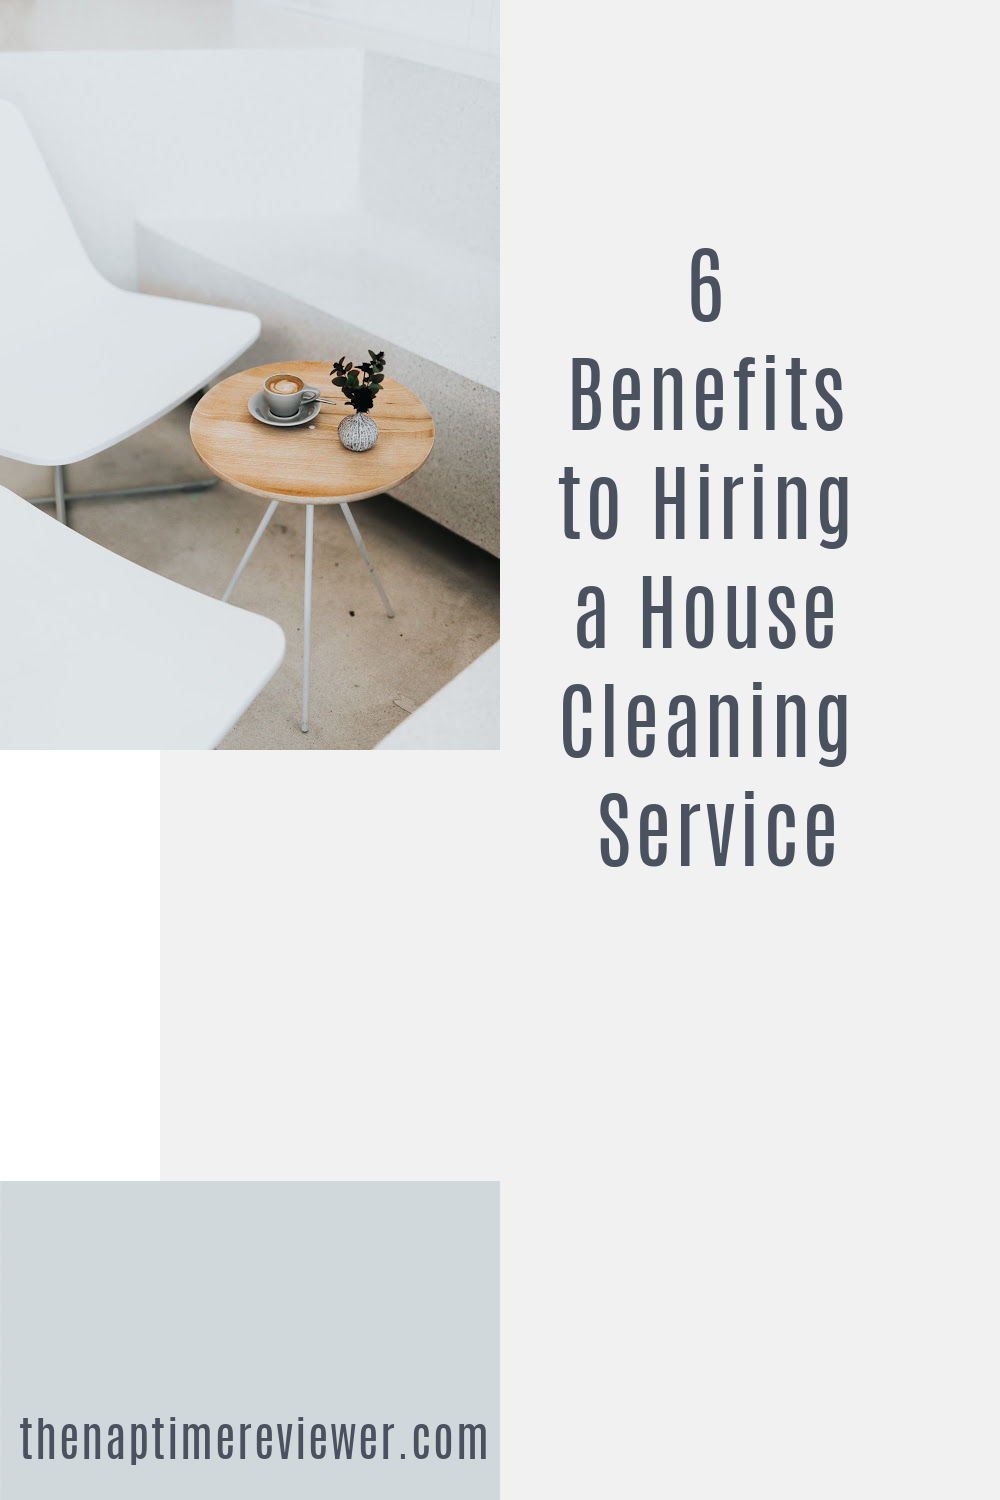 Benefits of hiring a cleaning service